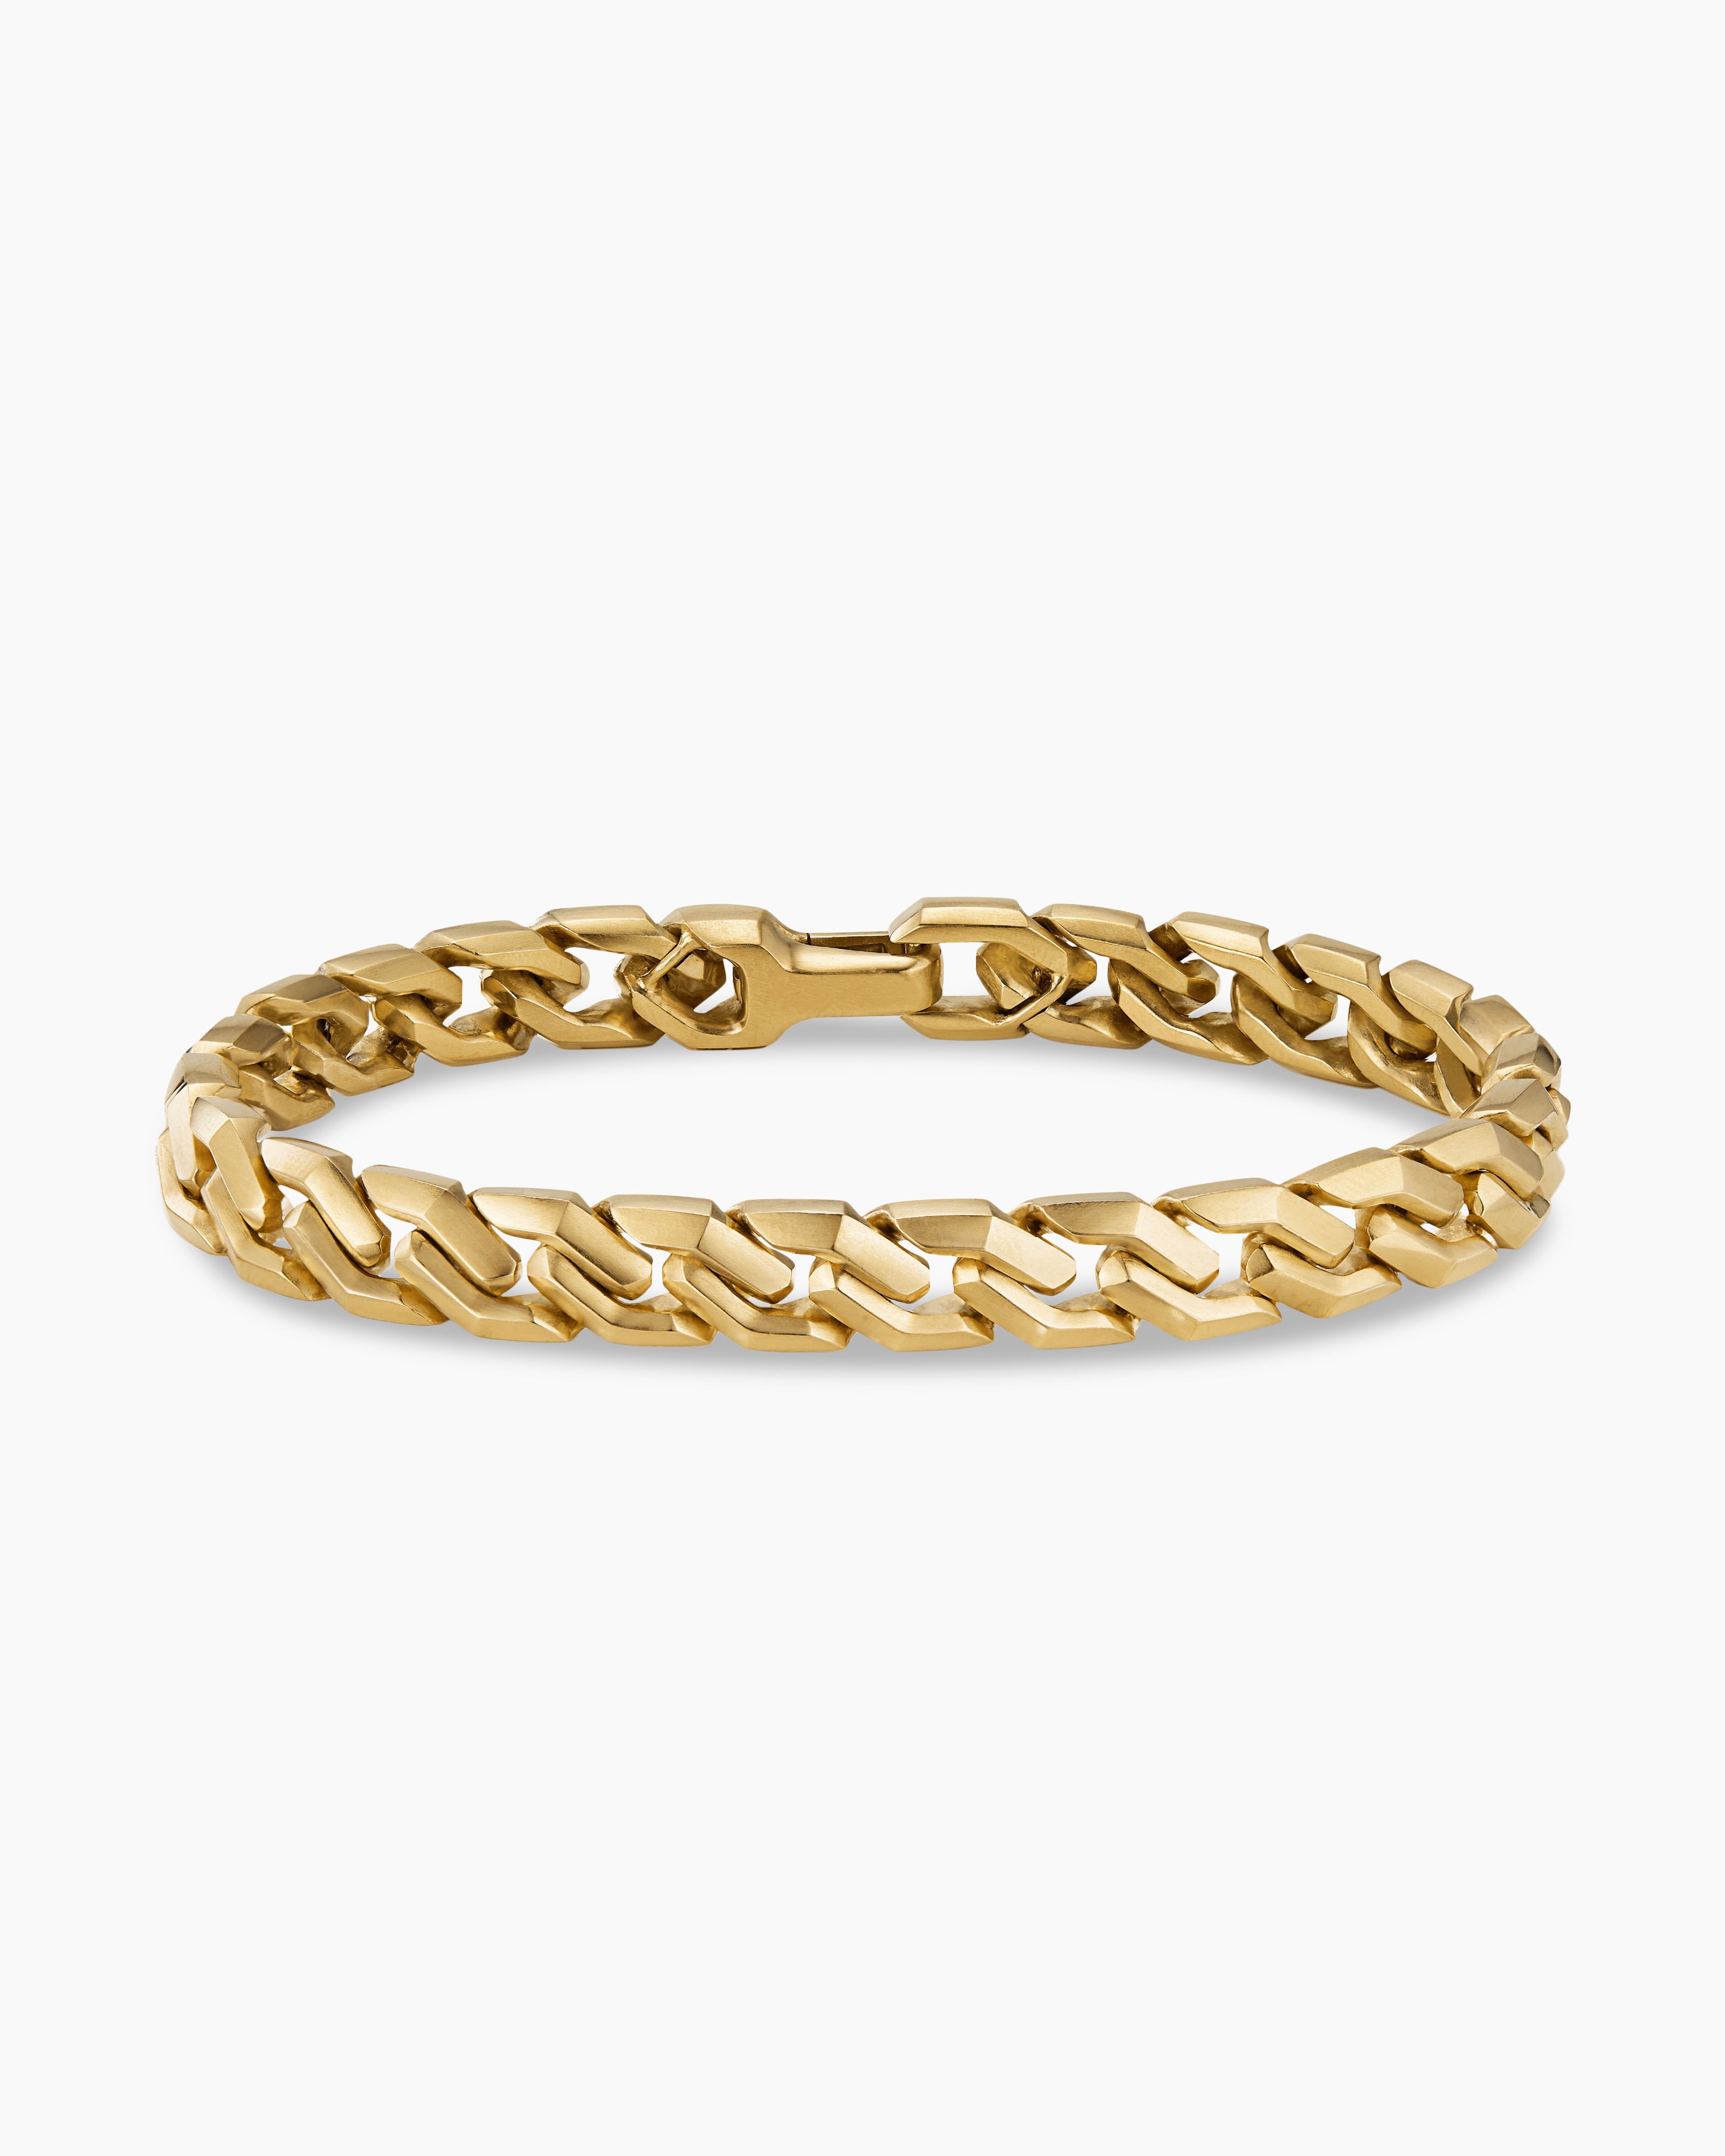 18k Yellow Gold Filled Massive Gold Chino Link Chain Bracelet For Women And  Men Fashionable Wrist Braceslet Gift, 18cm Long From Blingfashion, $12.19 |  DHgate.Com